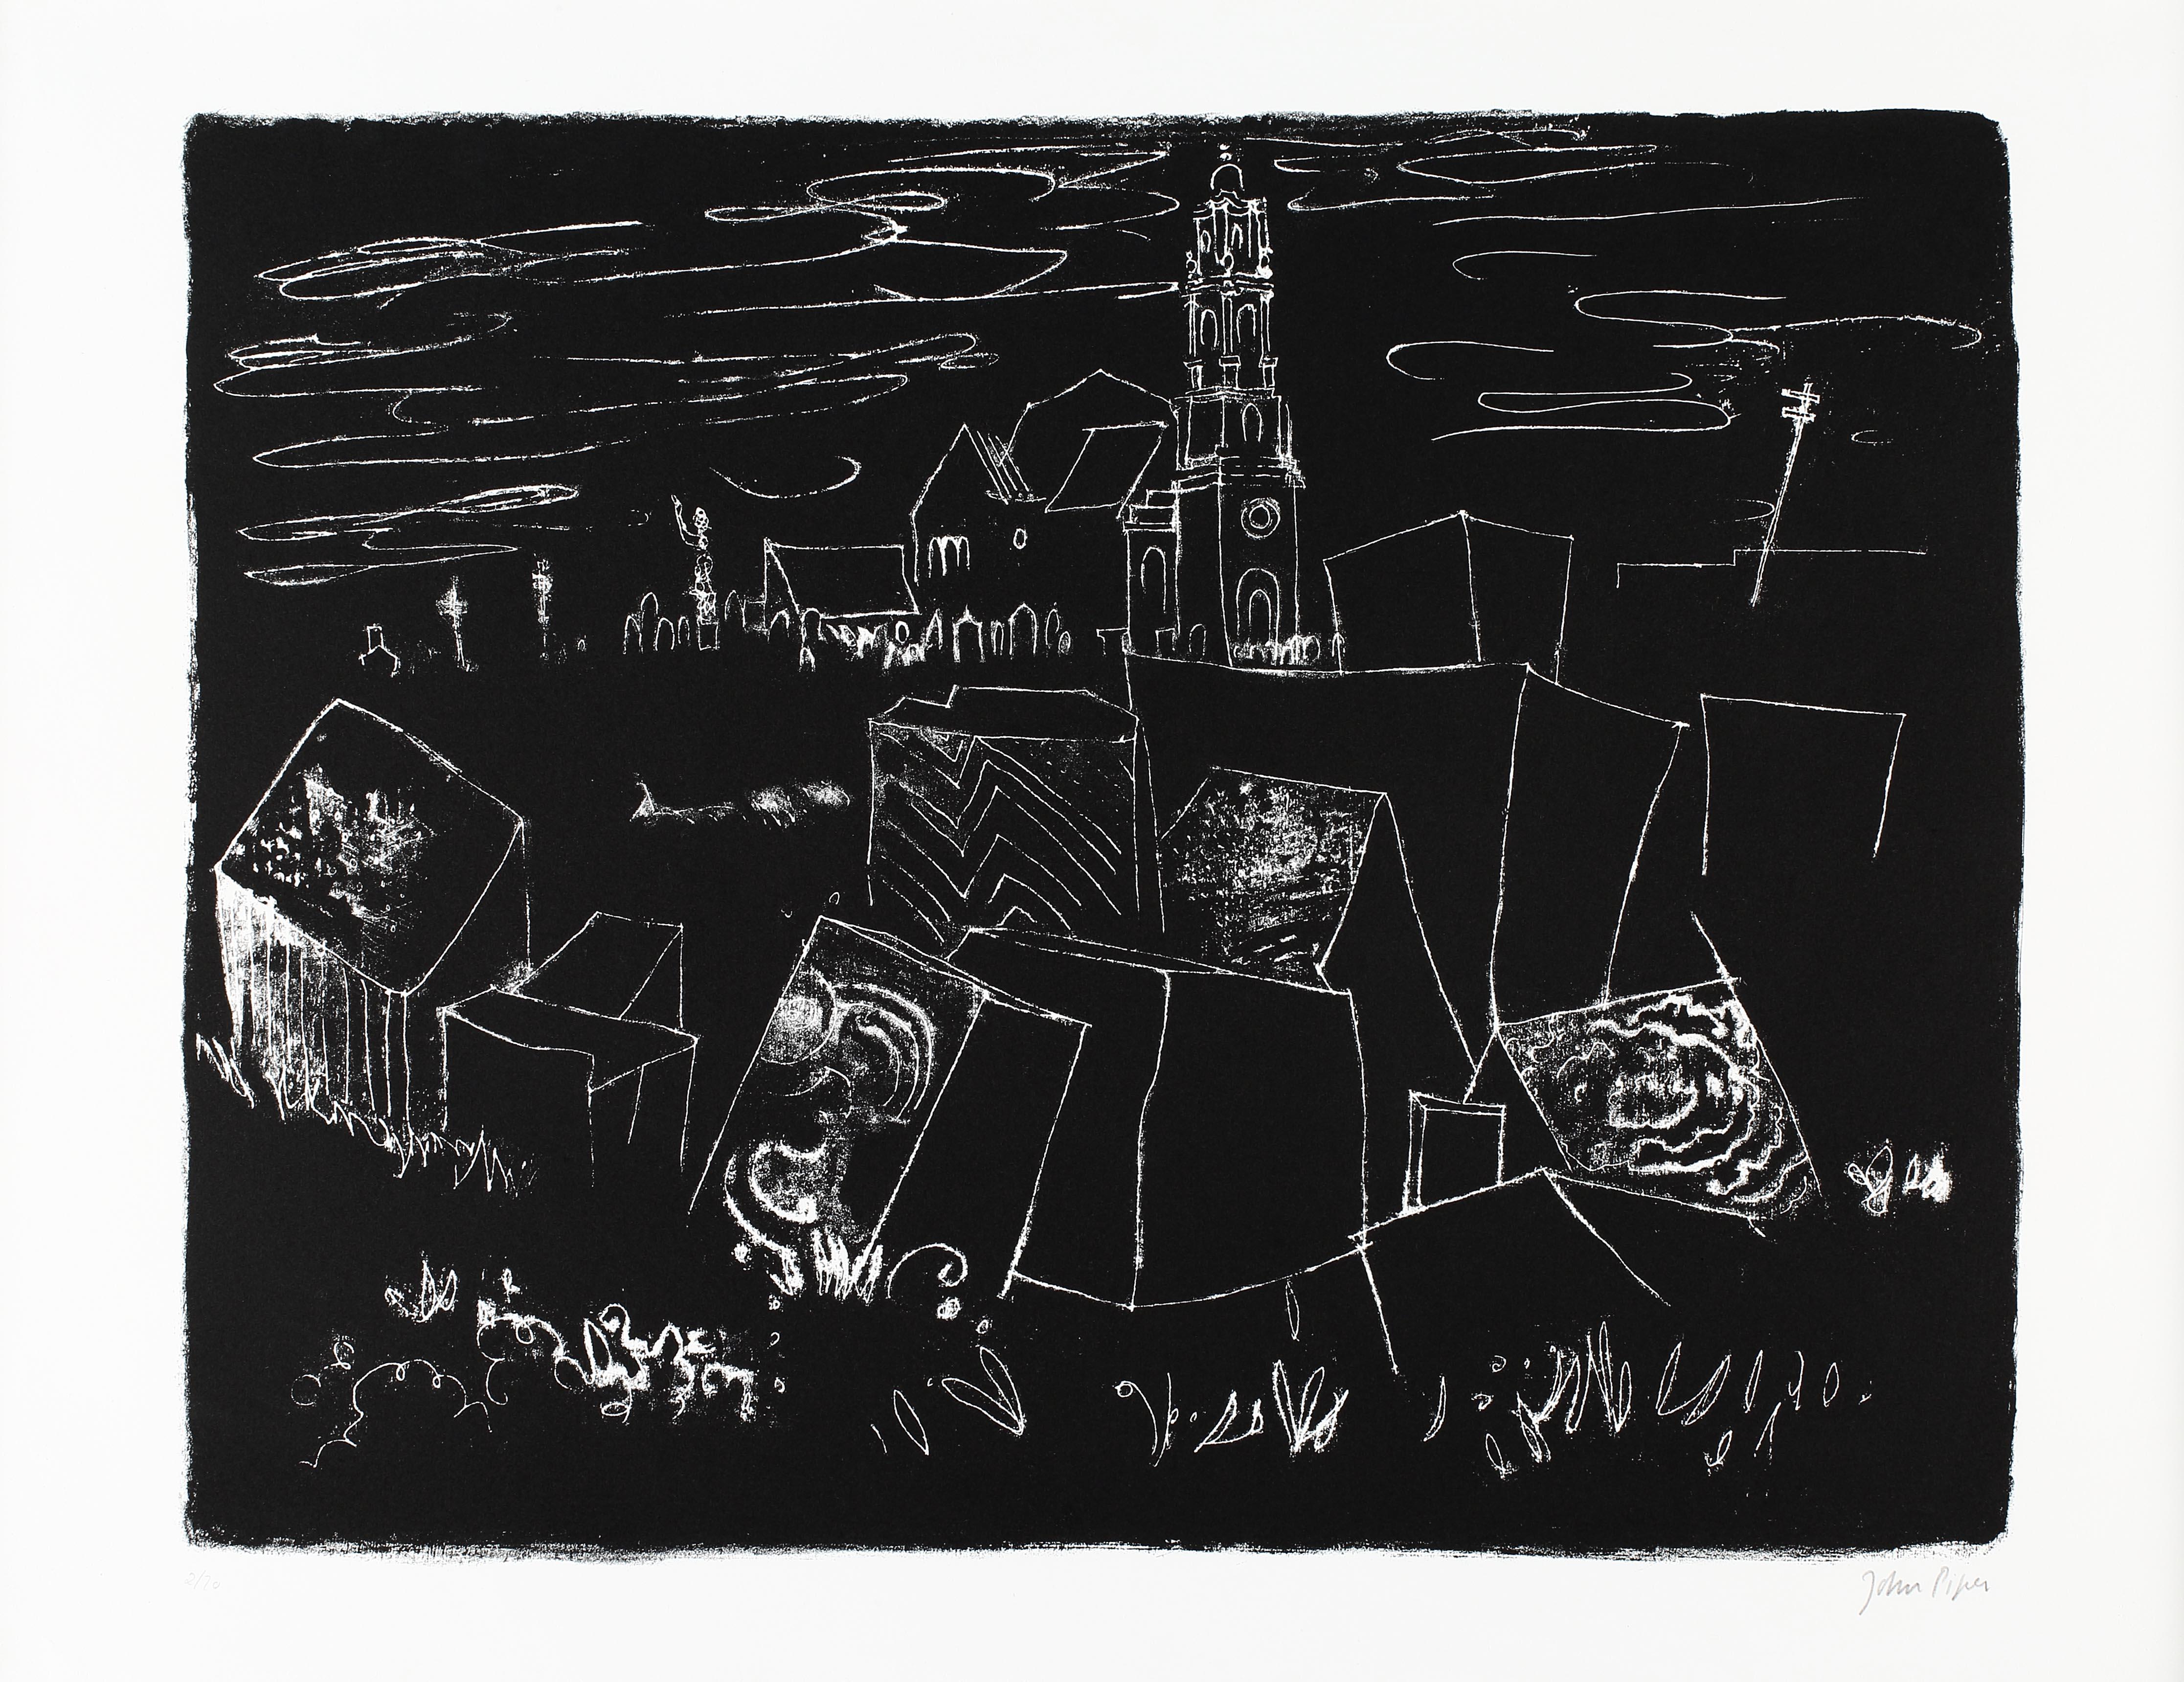 JOHN PIPER CH (BRITISH,1903-1992) : 16. EASTON, PORTLAND, DORSET: ST GEORGE REFORNE, AN 18TH CENTURY CHURCH AMONG THE QUARRIES, NUMBERED 2/70 LOWER LEFT AND SIGNED LOWER RIGHT IN PENCIL. 1964 LEVINSON 137. LITHOGRAPH ON PAPER
Striking monotone by a